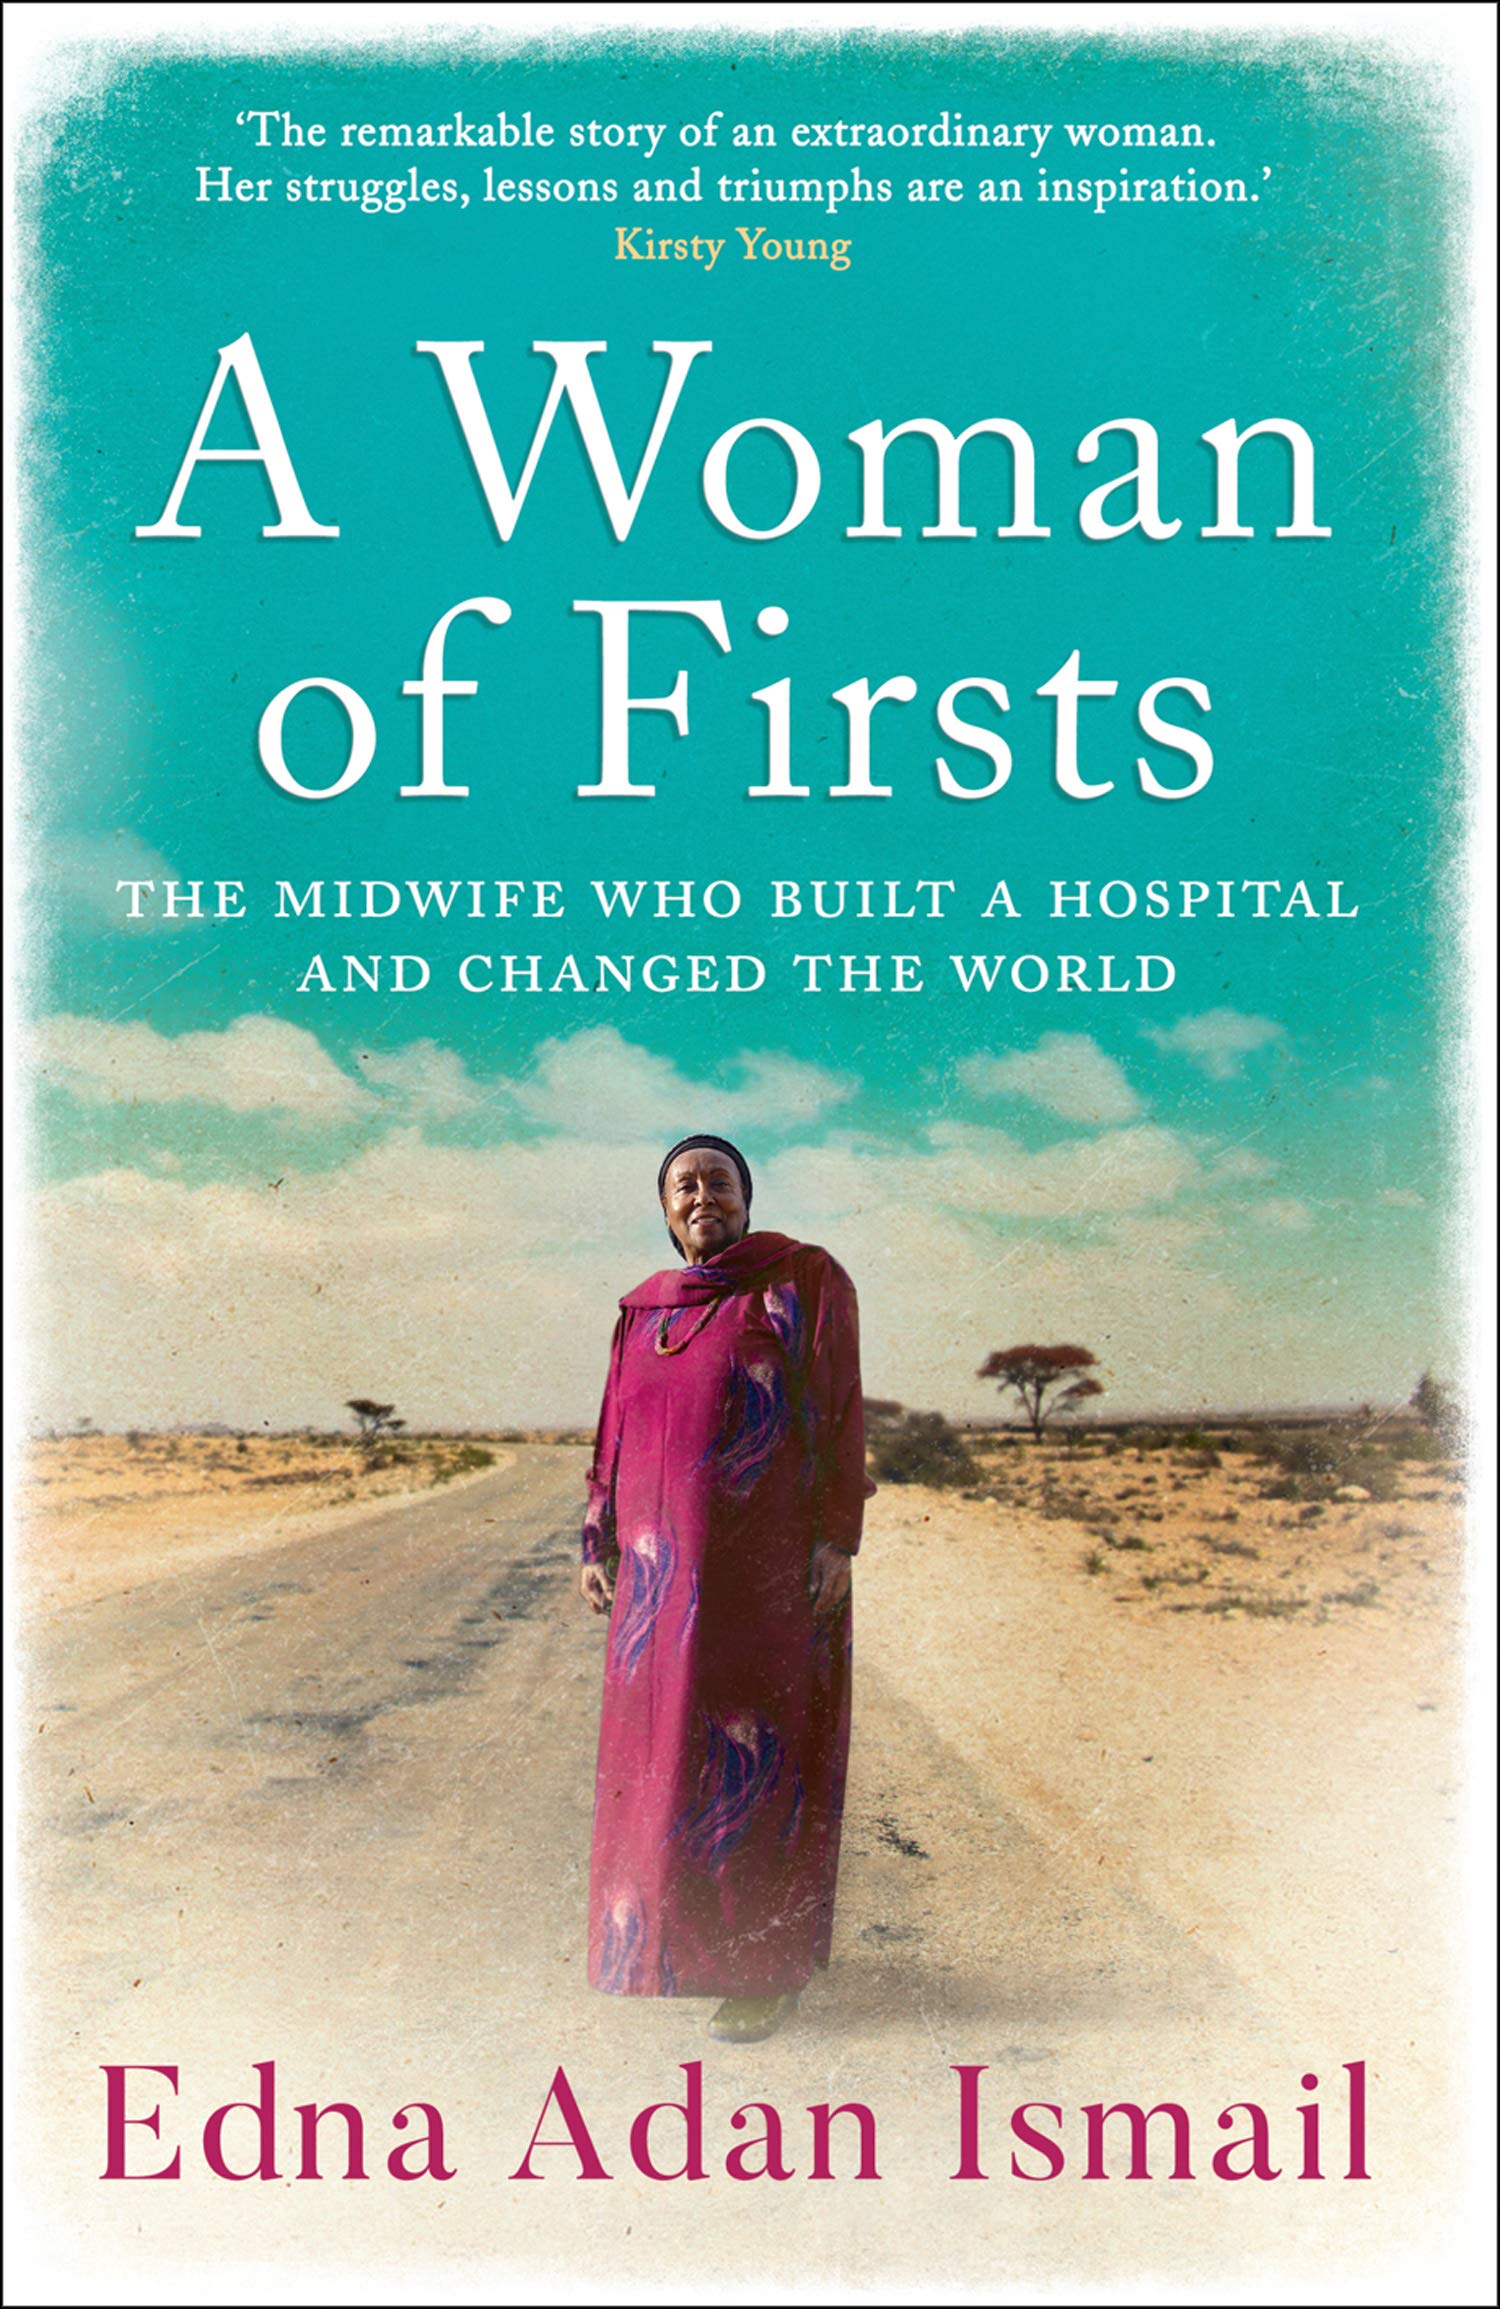 Cover of A Woman of Firsts by Somaliland writer Edna Adan Ismail 